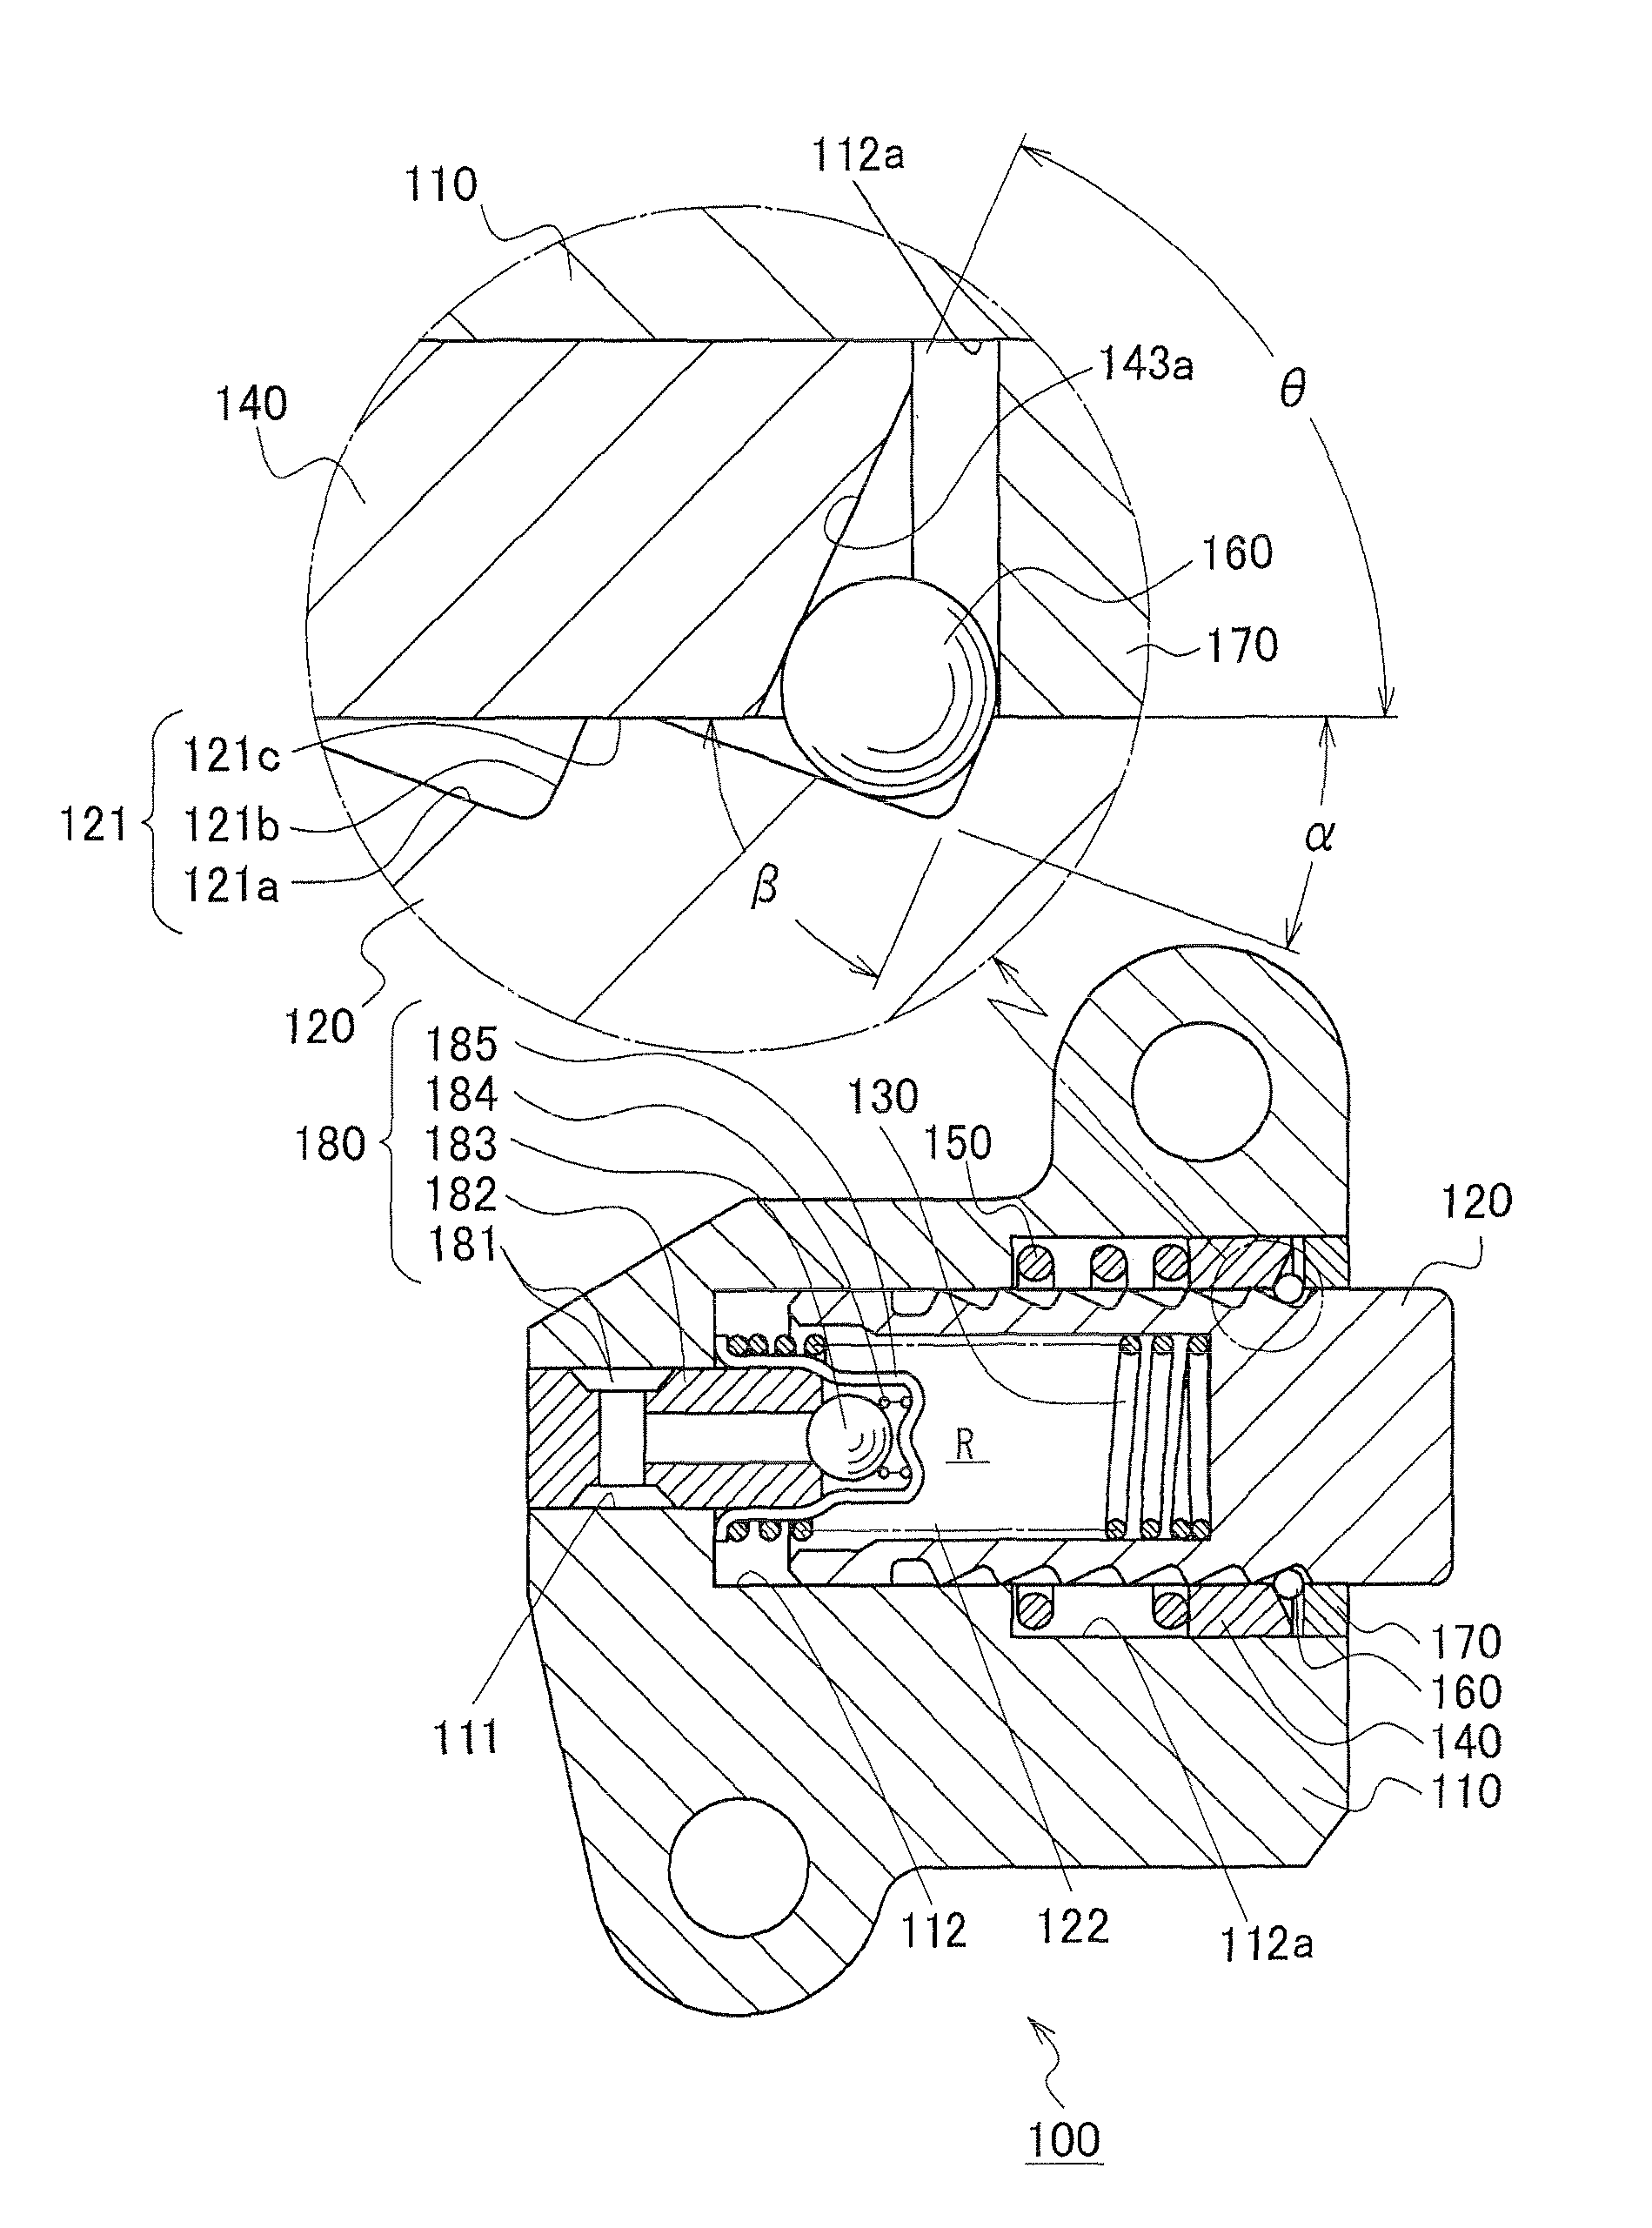 Ball-type tensioner